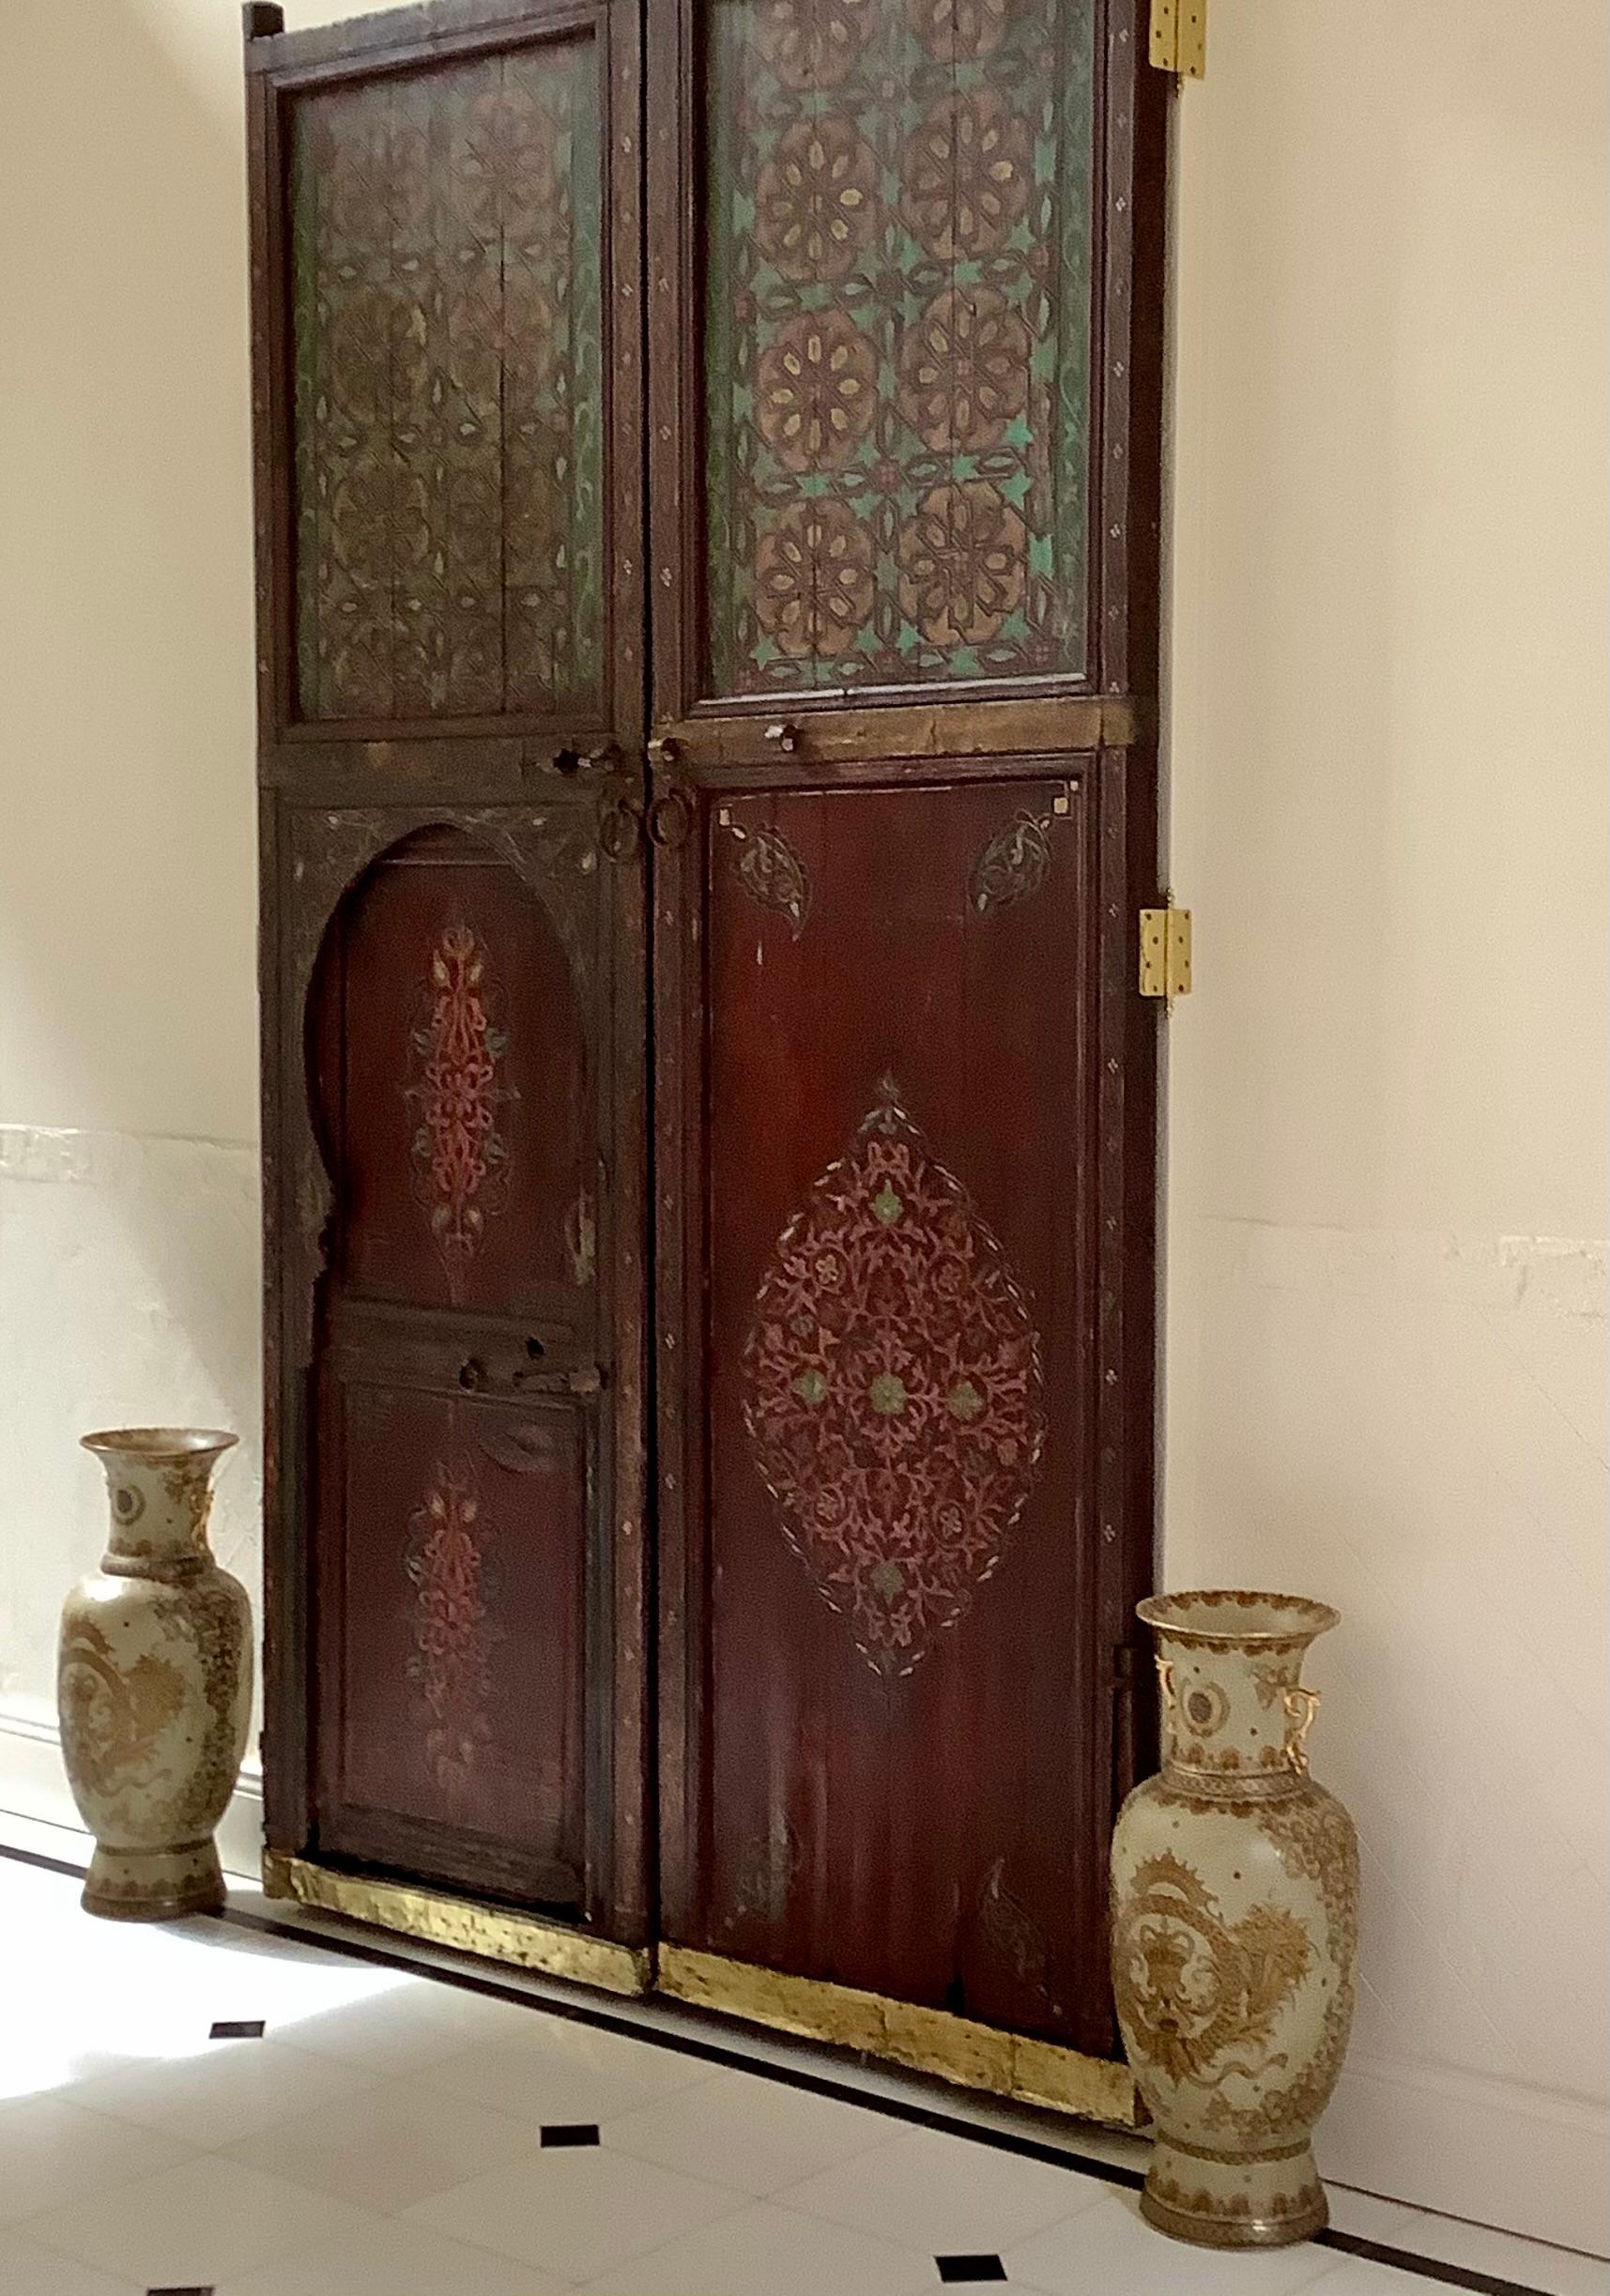 19th Century Hand Painted Moorish Moroccan Antique Double Doors

Extra large in size, scaling 12'+ in height, these double doors are antiques from the 19thC boasting with color and artwork. Each panel is decorated and painted by handmade wood carved